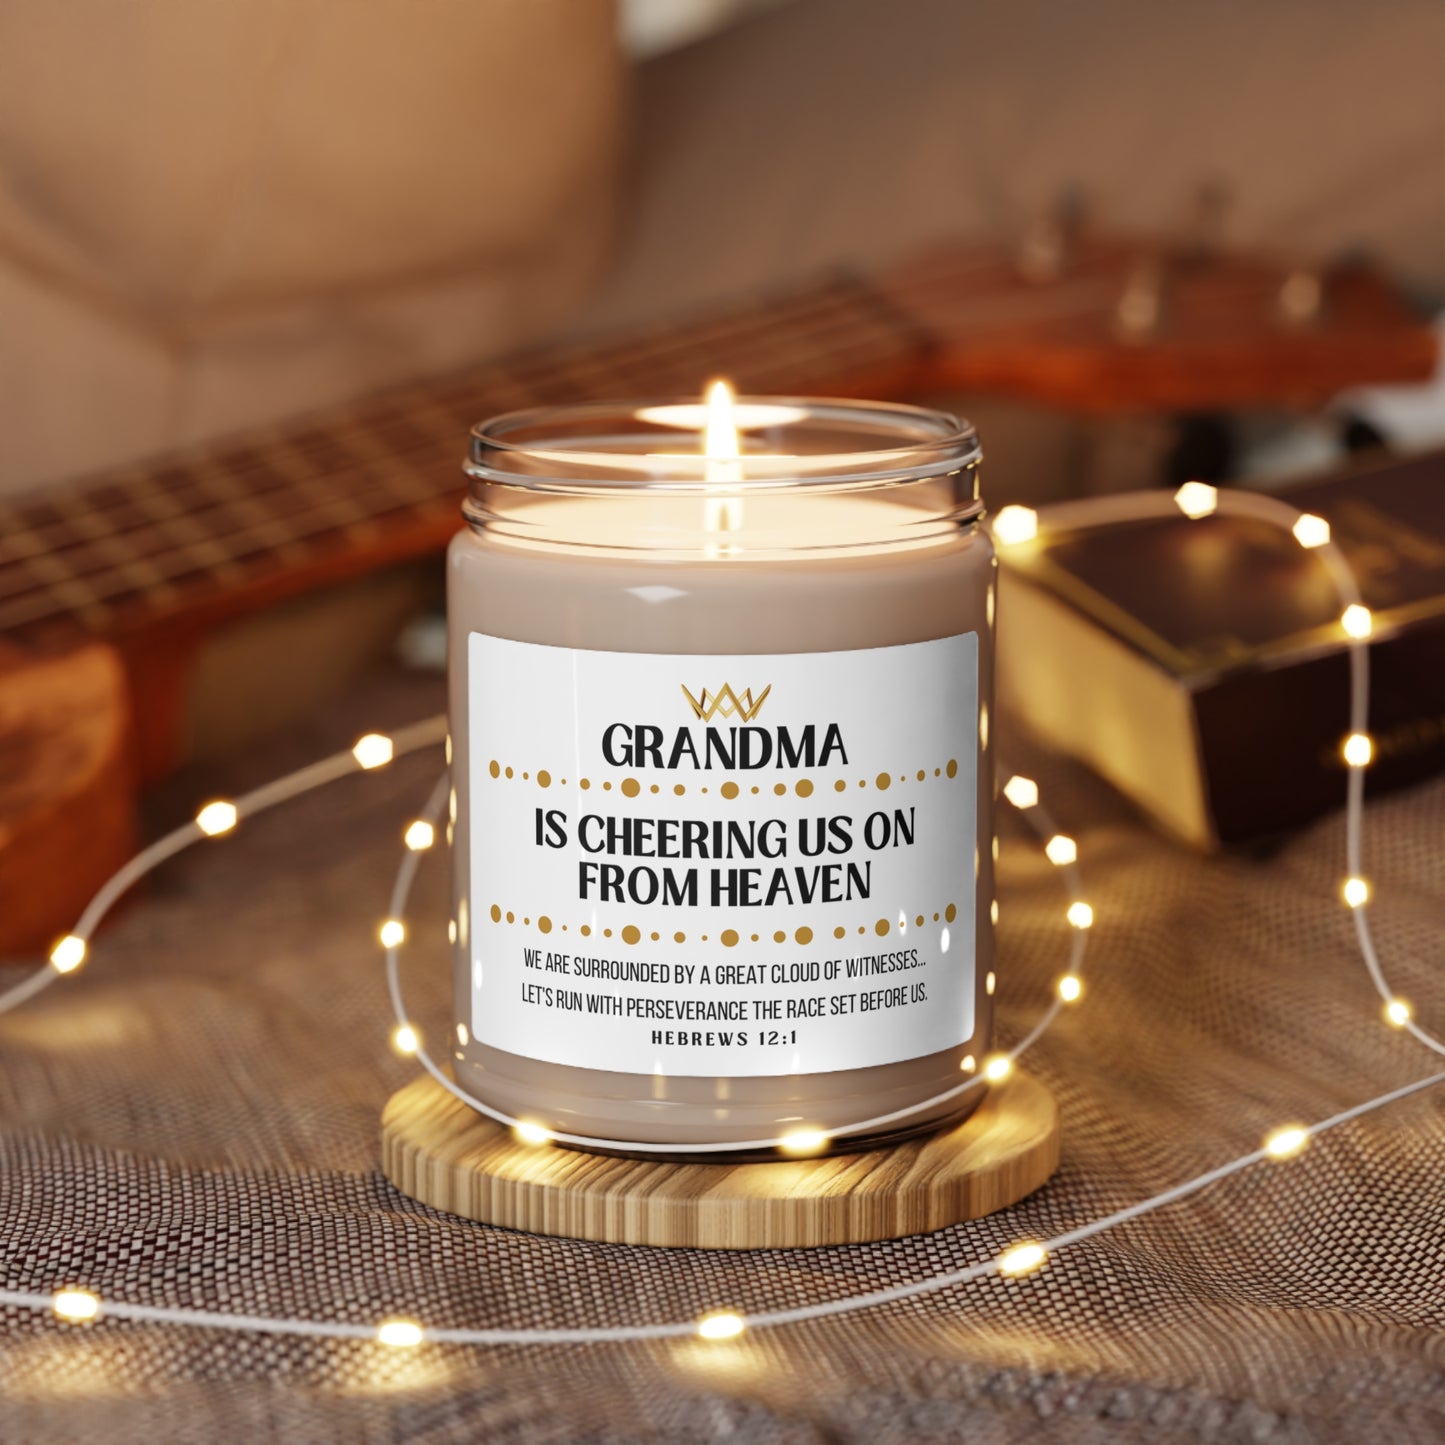 Grandma Memorial Soy Wax Candle, Cheering Us On From Heaven